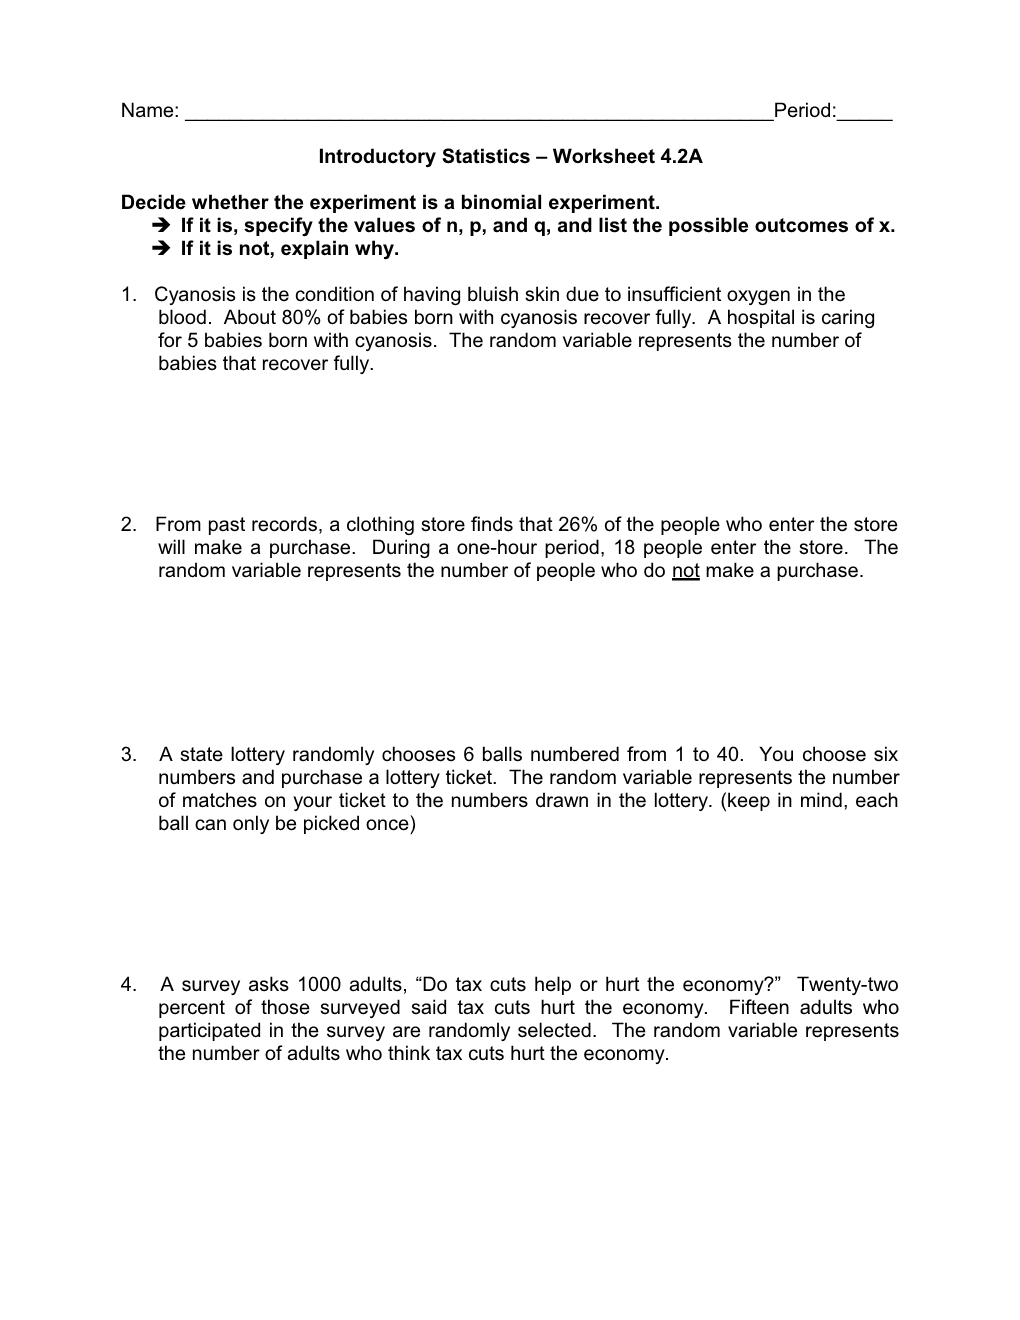 Introductory Statistics Worksheet 4.2A